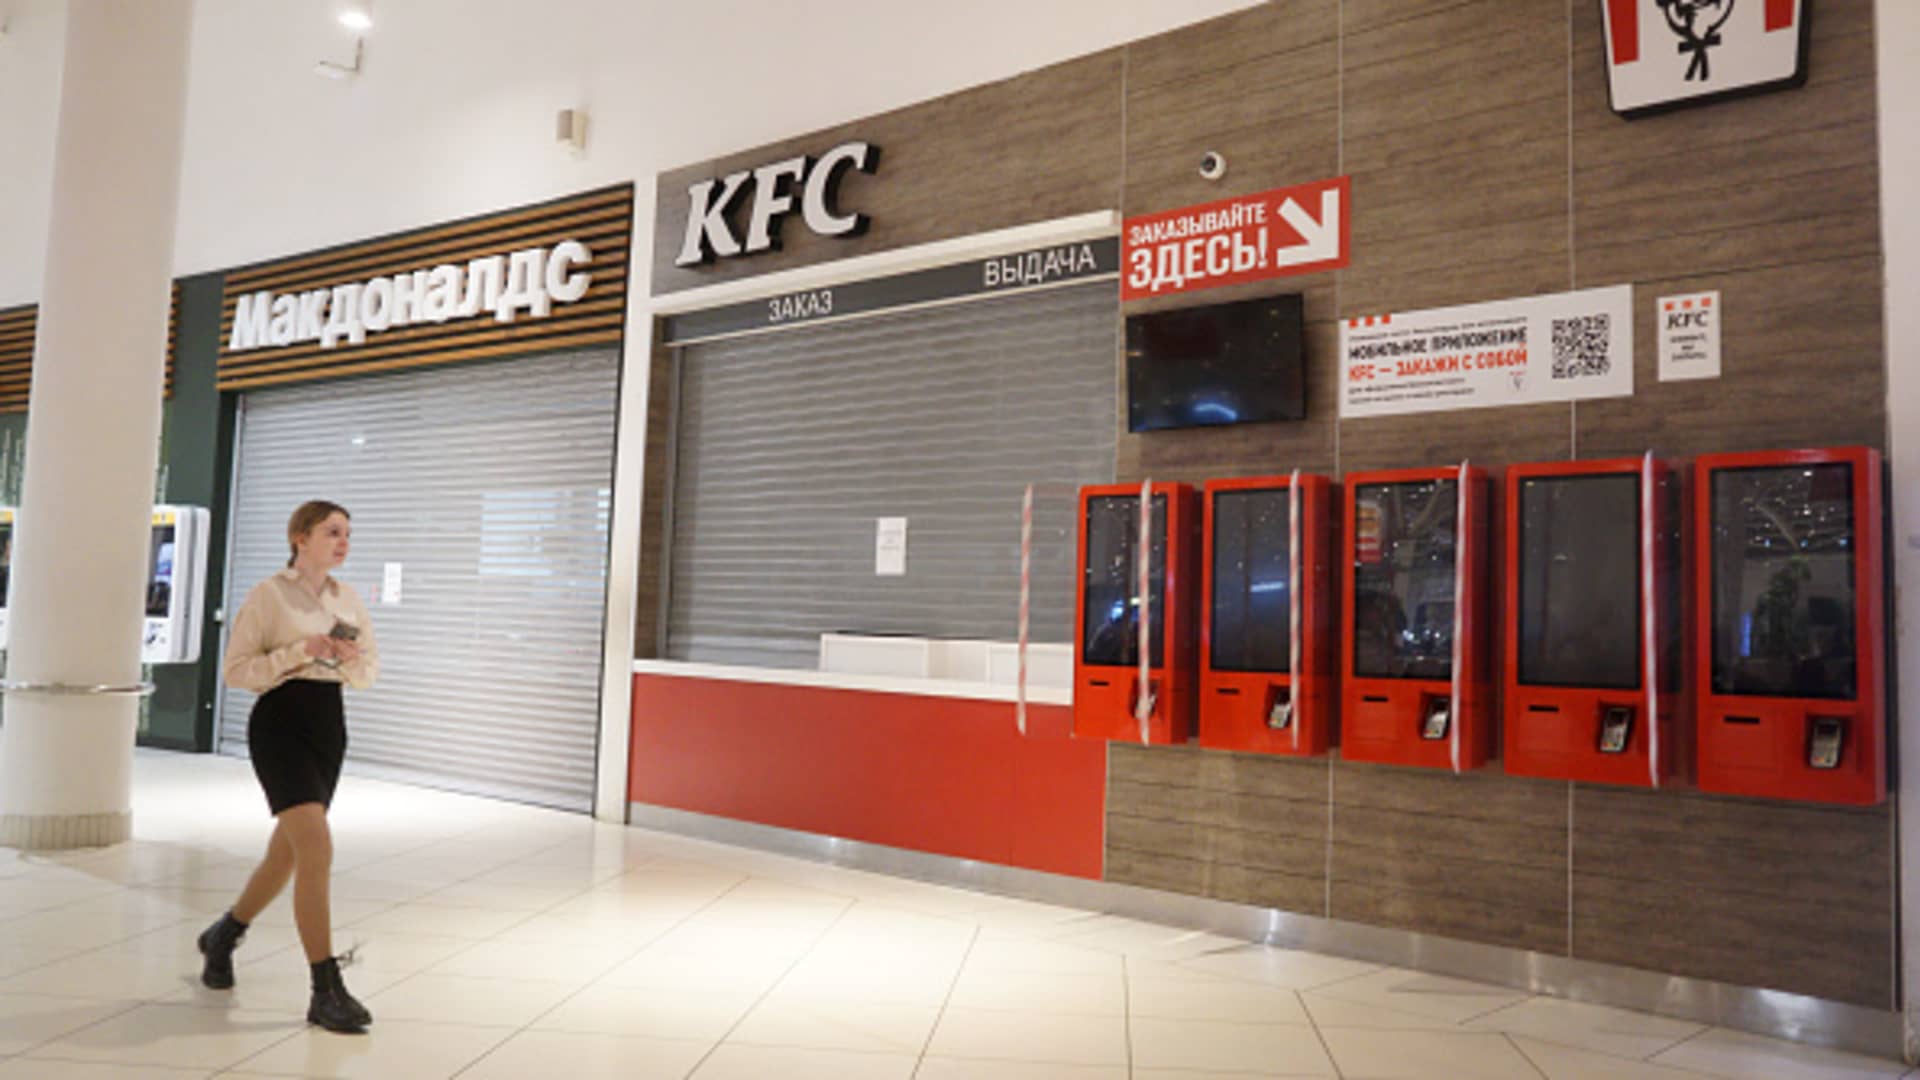 Yum Brands says it is close to selling its Russian KFC business - CNBC : After selling its Russian Pizza Hut franchises in May, Yum Brands is close to selling its KFC restaurants.  | Tranquility 國際社群